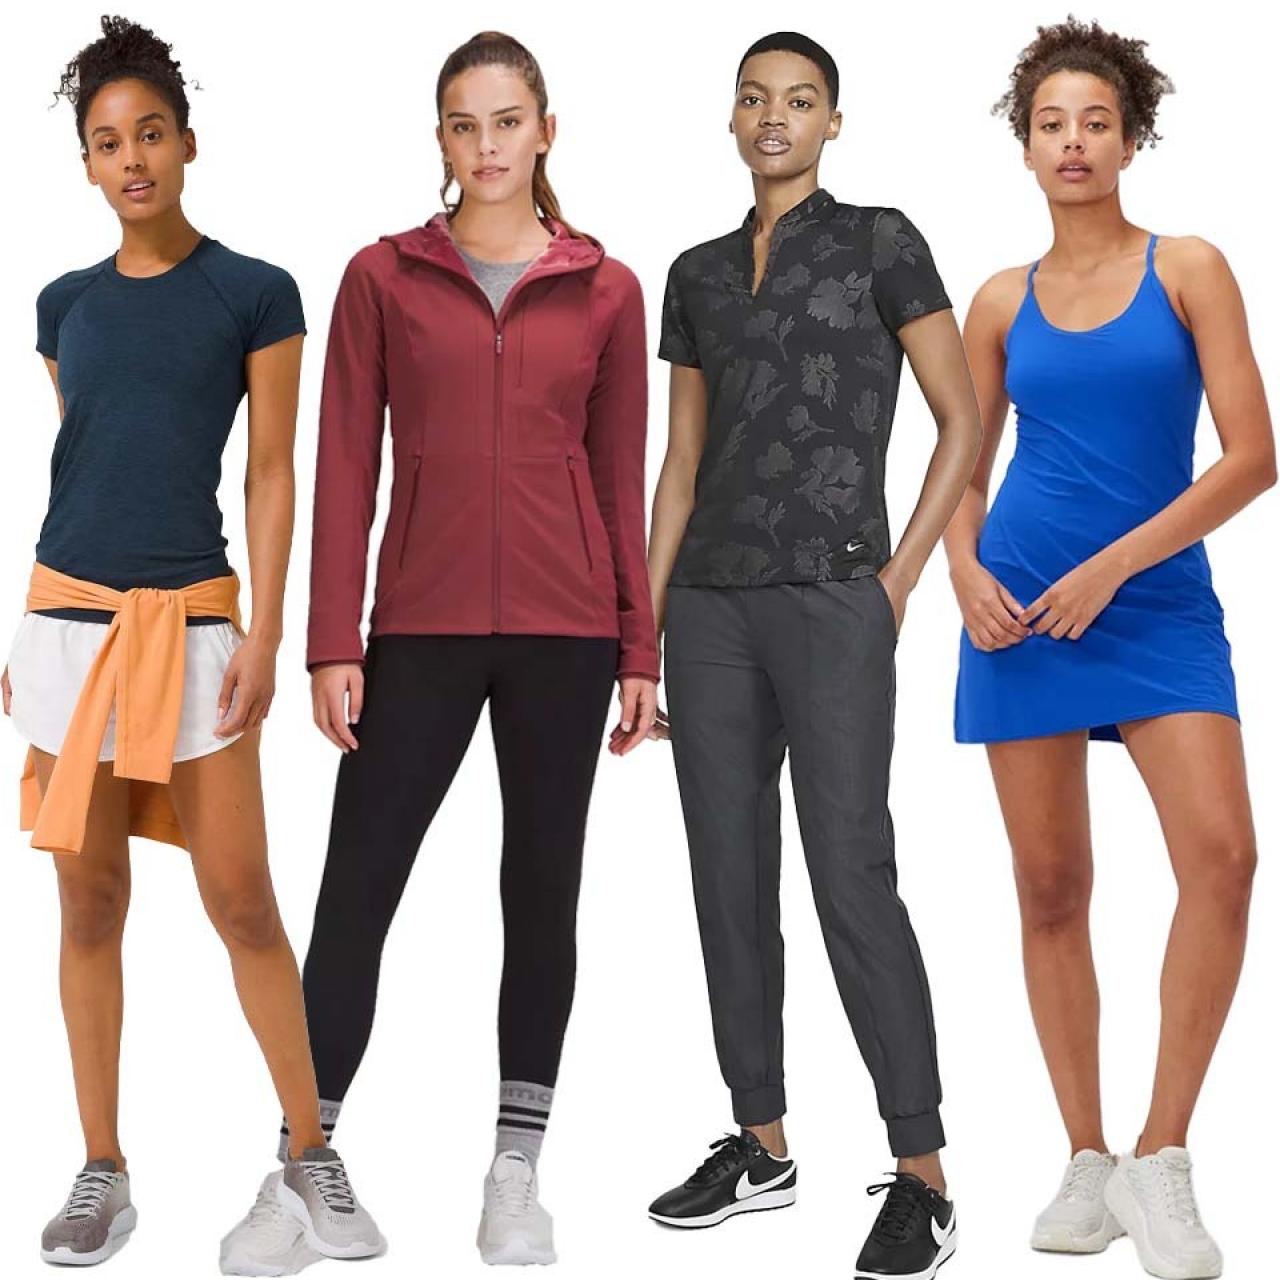 10 women's athleisure pieces we'd love to wear for golf, Golf Equipment:  Clubs, Balls, Bags